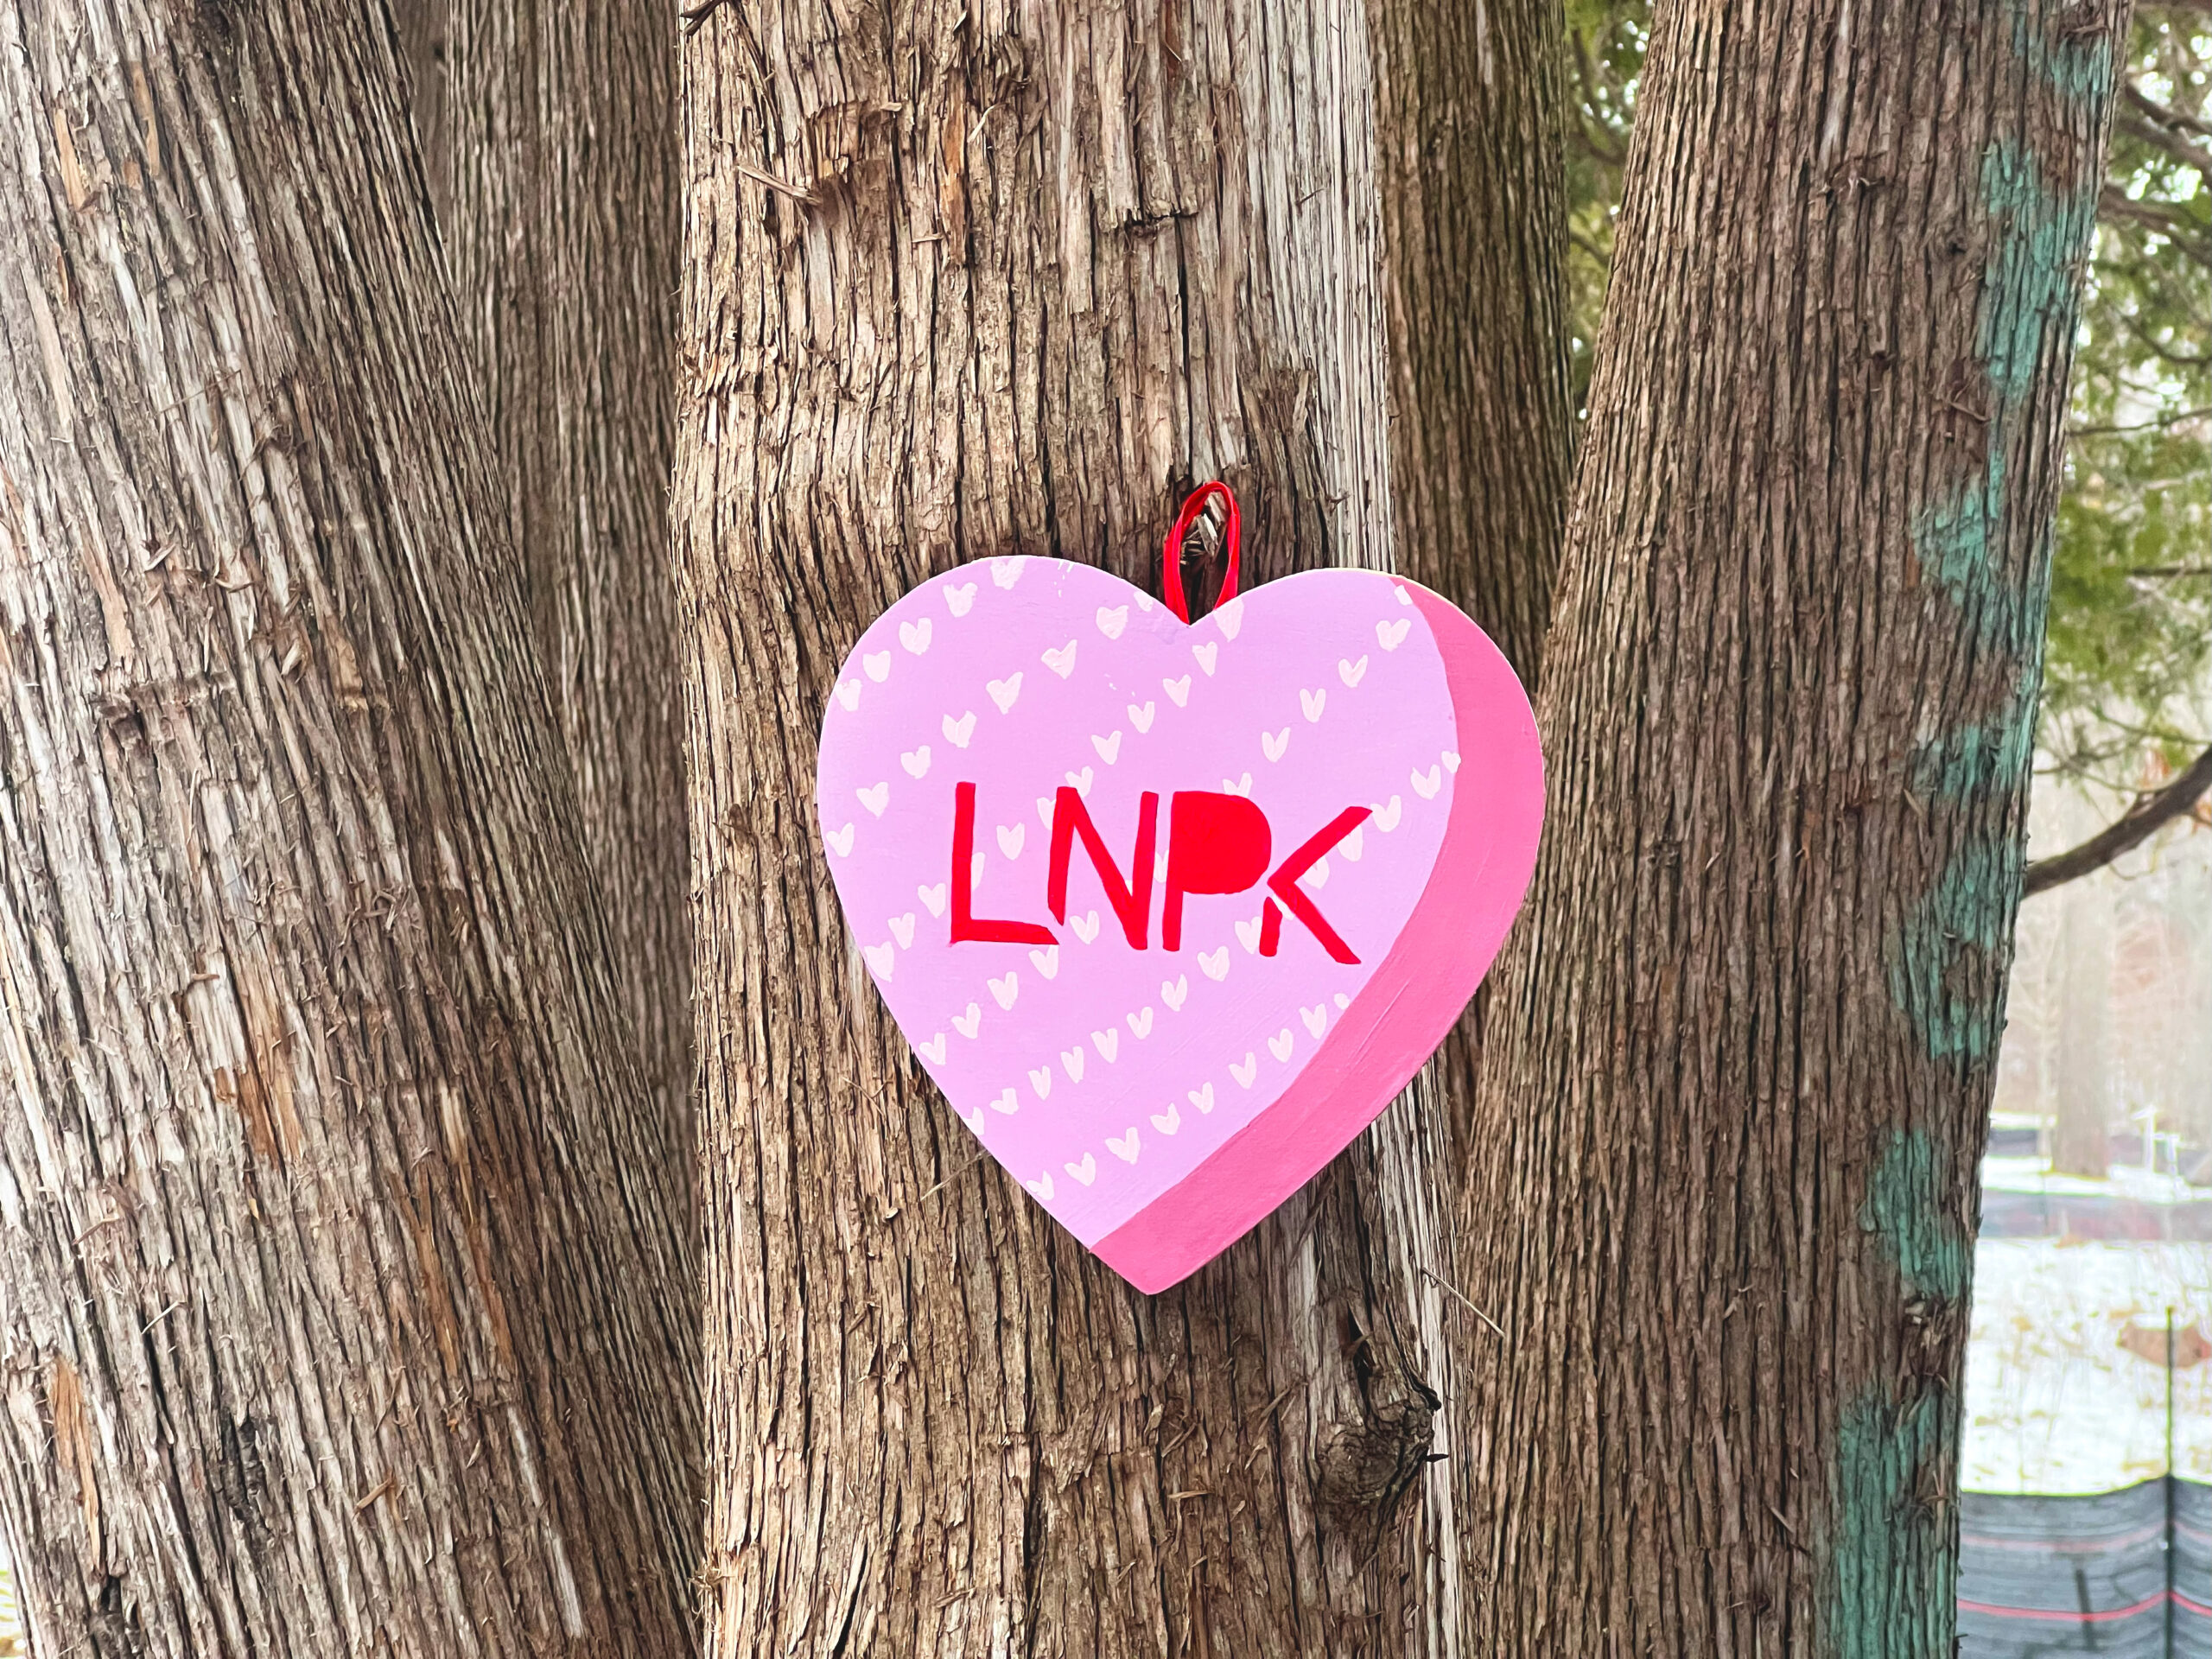 Pink heart with rows of white polka dots and "LNPK" in red hangs on a tree in the sun.